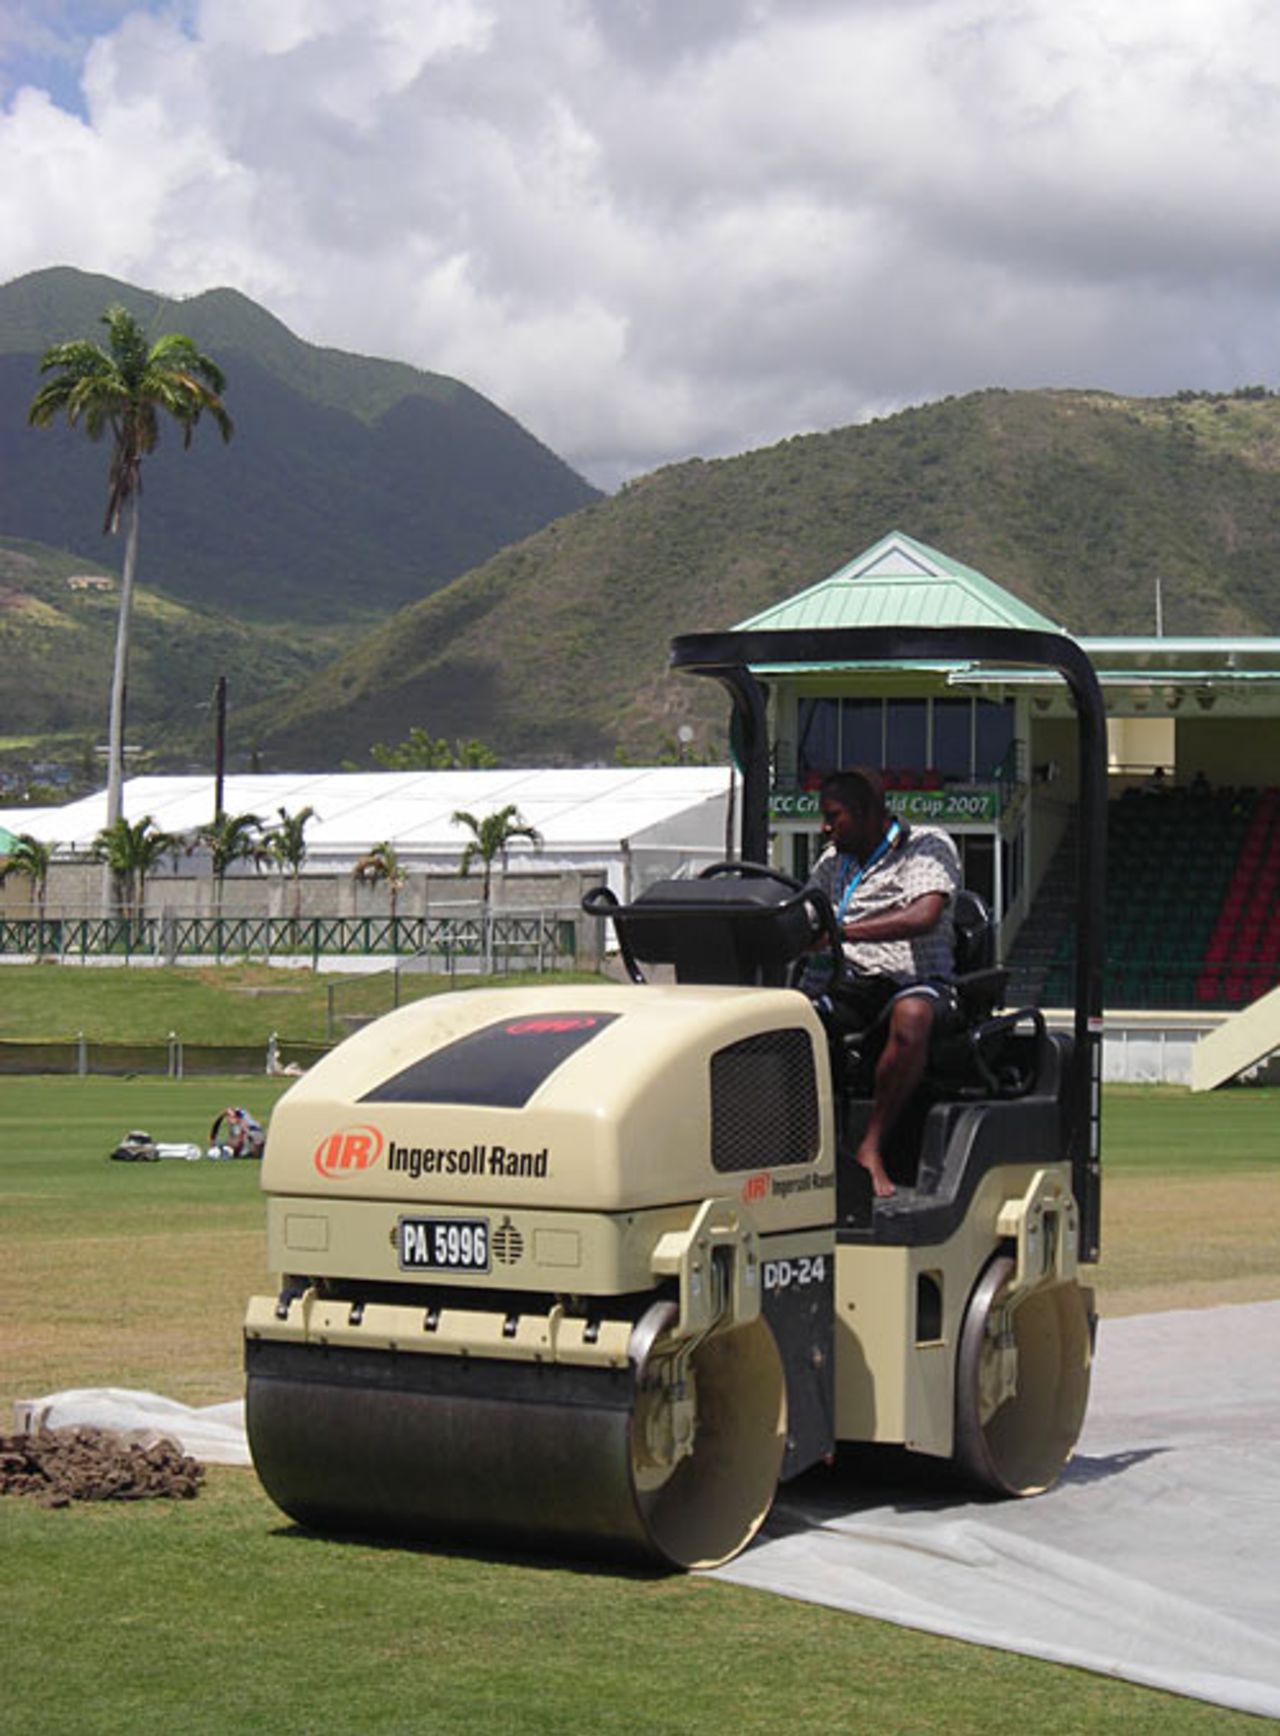 The big roller gets to work on the pitch at Warner Park, 2007 World Cup, Basseterre, St Kitts, March 11, 2007